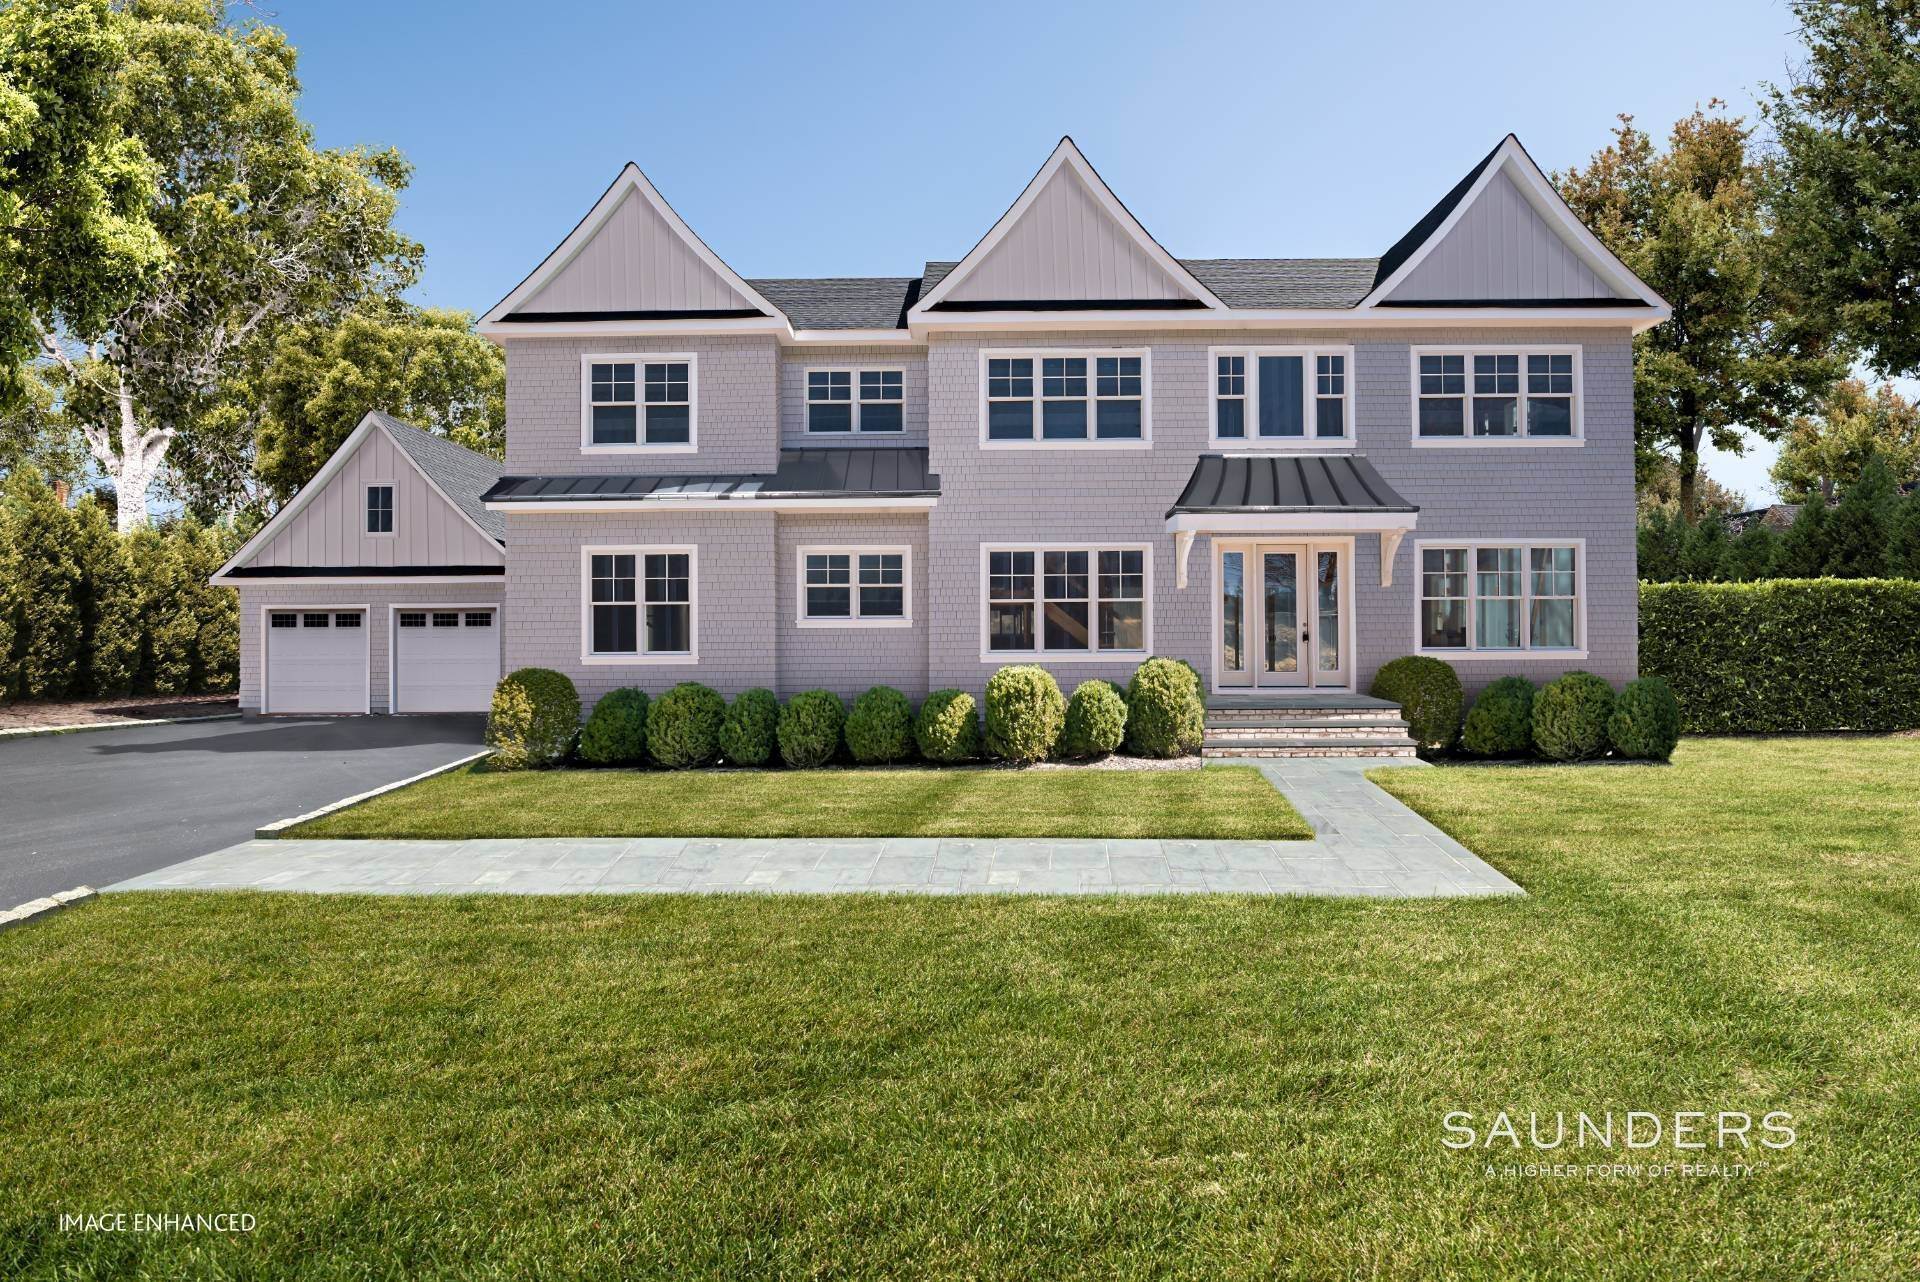 Single Family Homes for Sale at New Construction With Saltwater Pool In Desirable Quogue Village 46 Jessup Avenue, Quogue, NY 11959